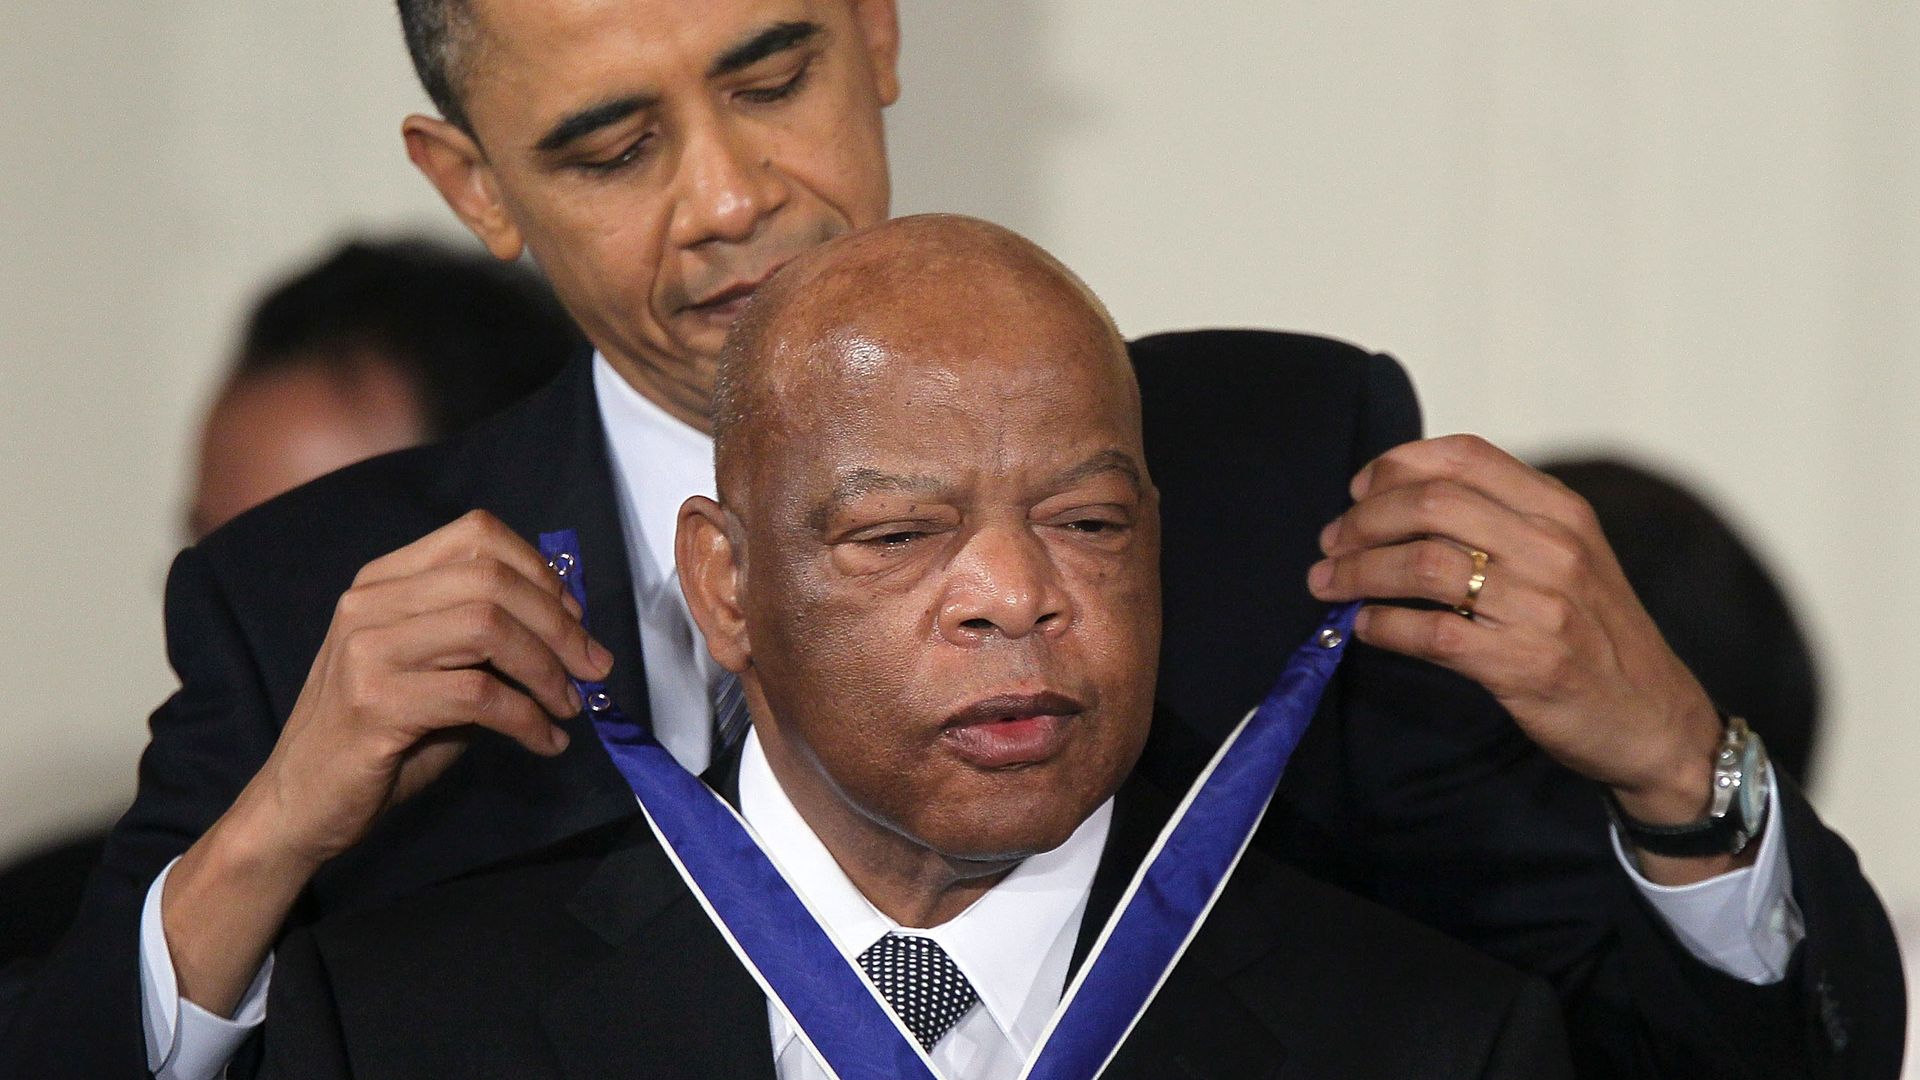 Rep. John Lewis (D-GA) (R) is presented with the 2010 Medal of Freedom by President Barack Obama during an East Room event at the White House February 15, 2011 